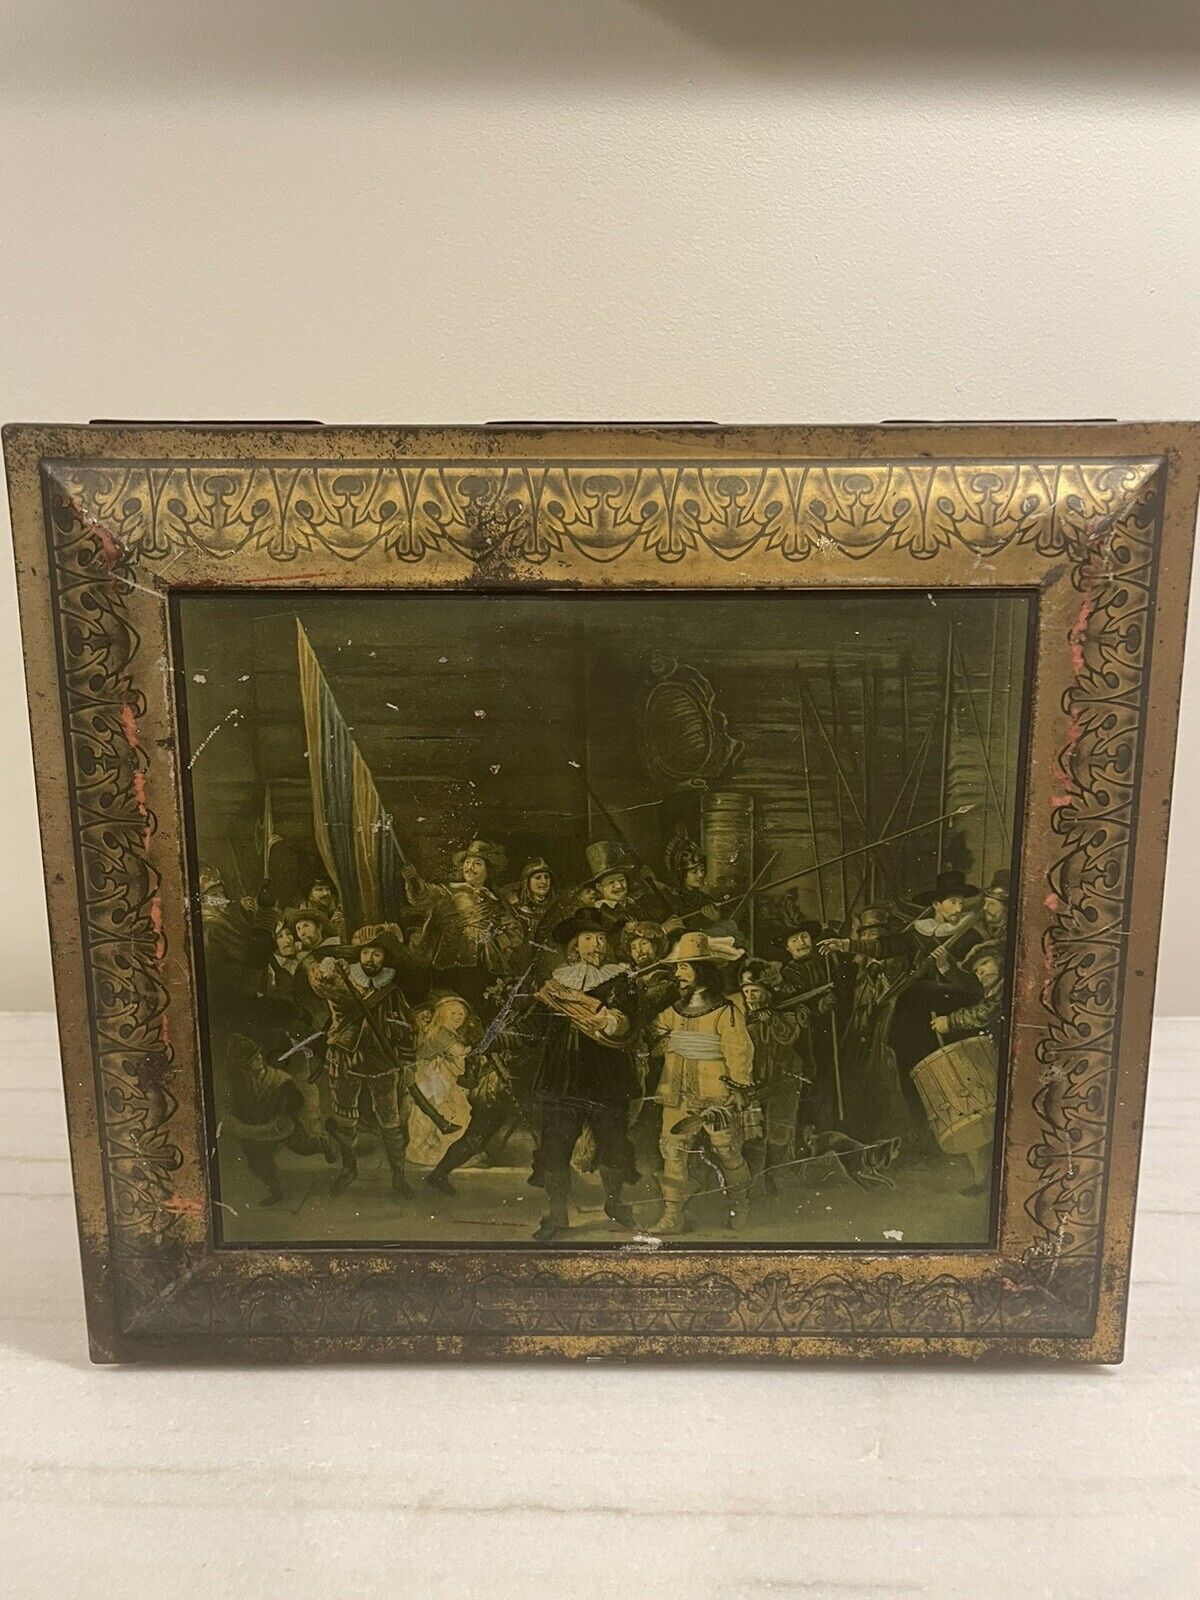 Rare Early 1900s Beech-Nut Rembrandt Tin